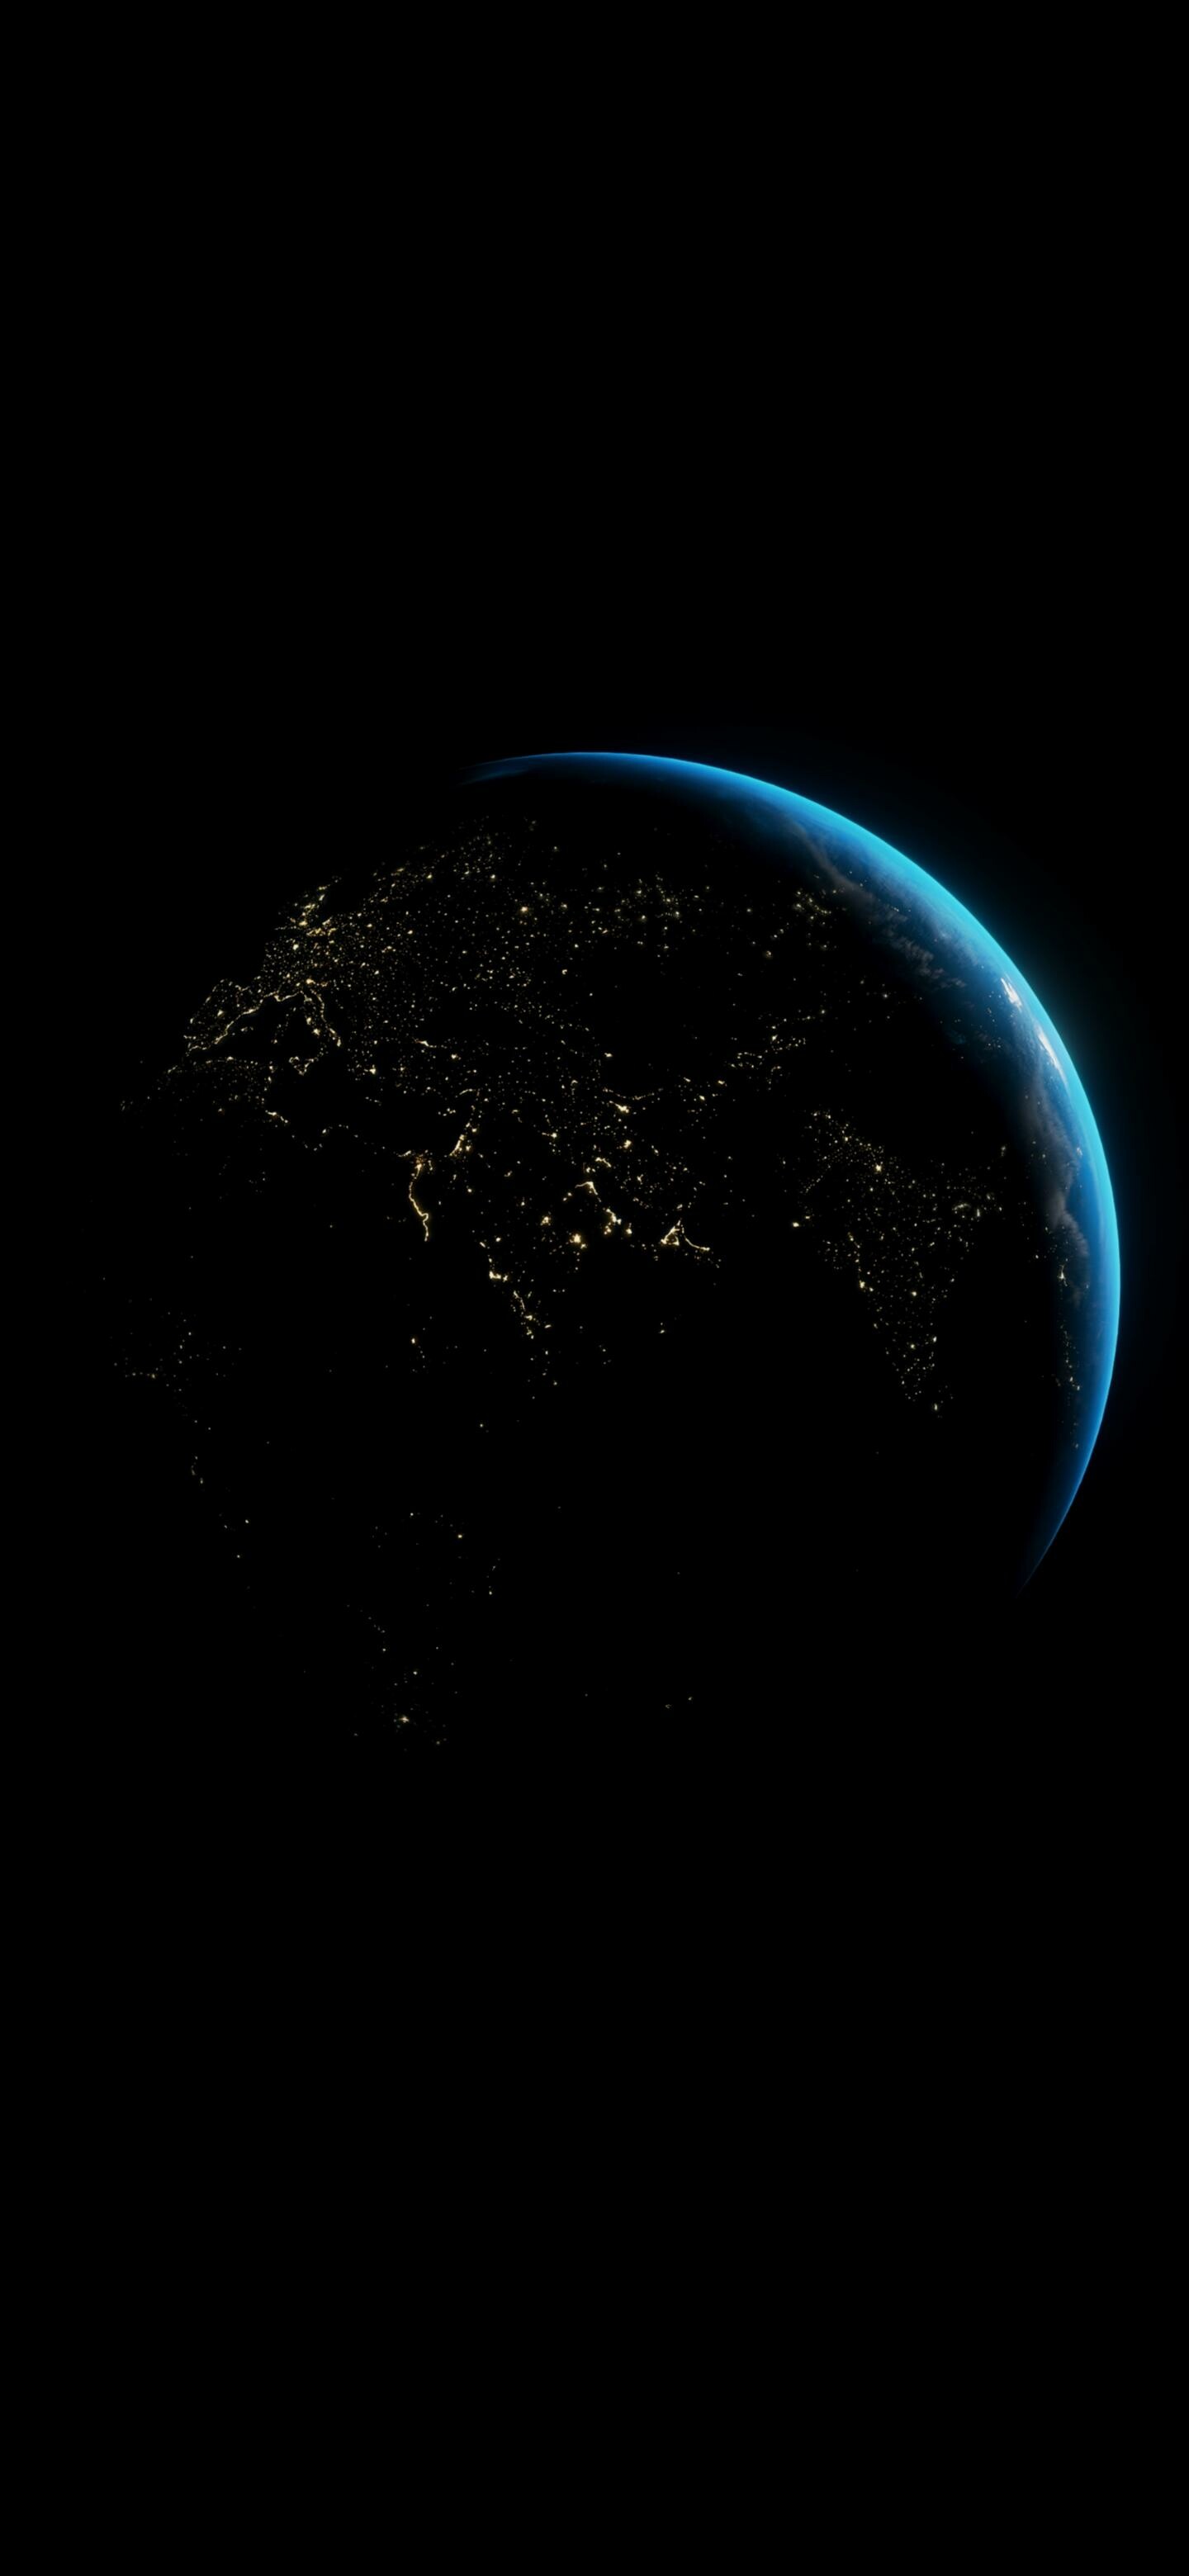 Earth at Night: The only place in the universe known to harbor life, in the dark. 1440x3120 HD Wallpaper.